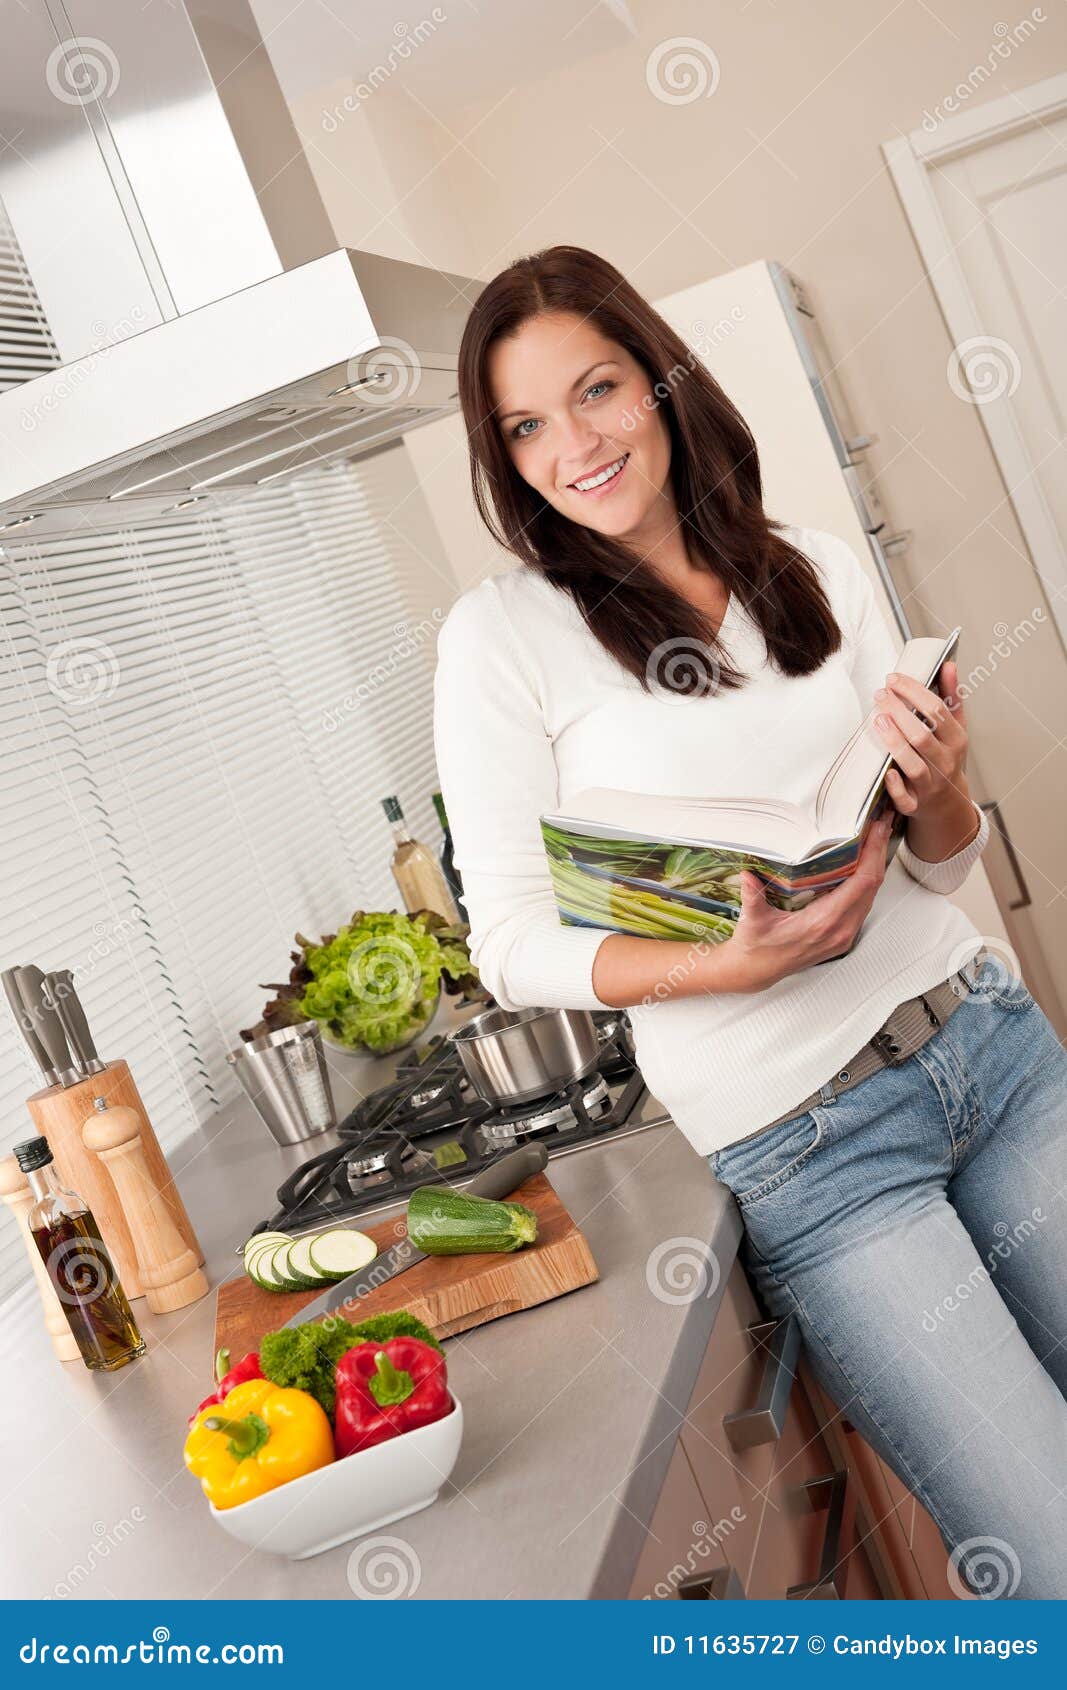 Young Woman Reading Cookbook In The Kitchen Royalty Free ...